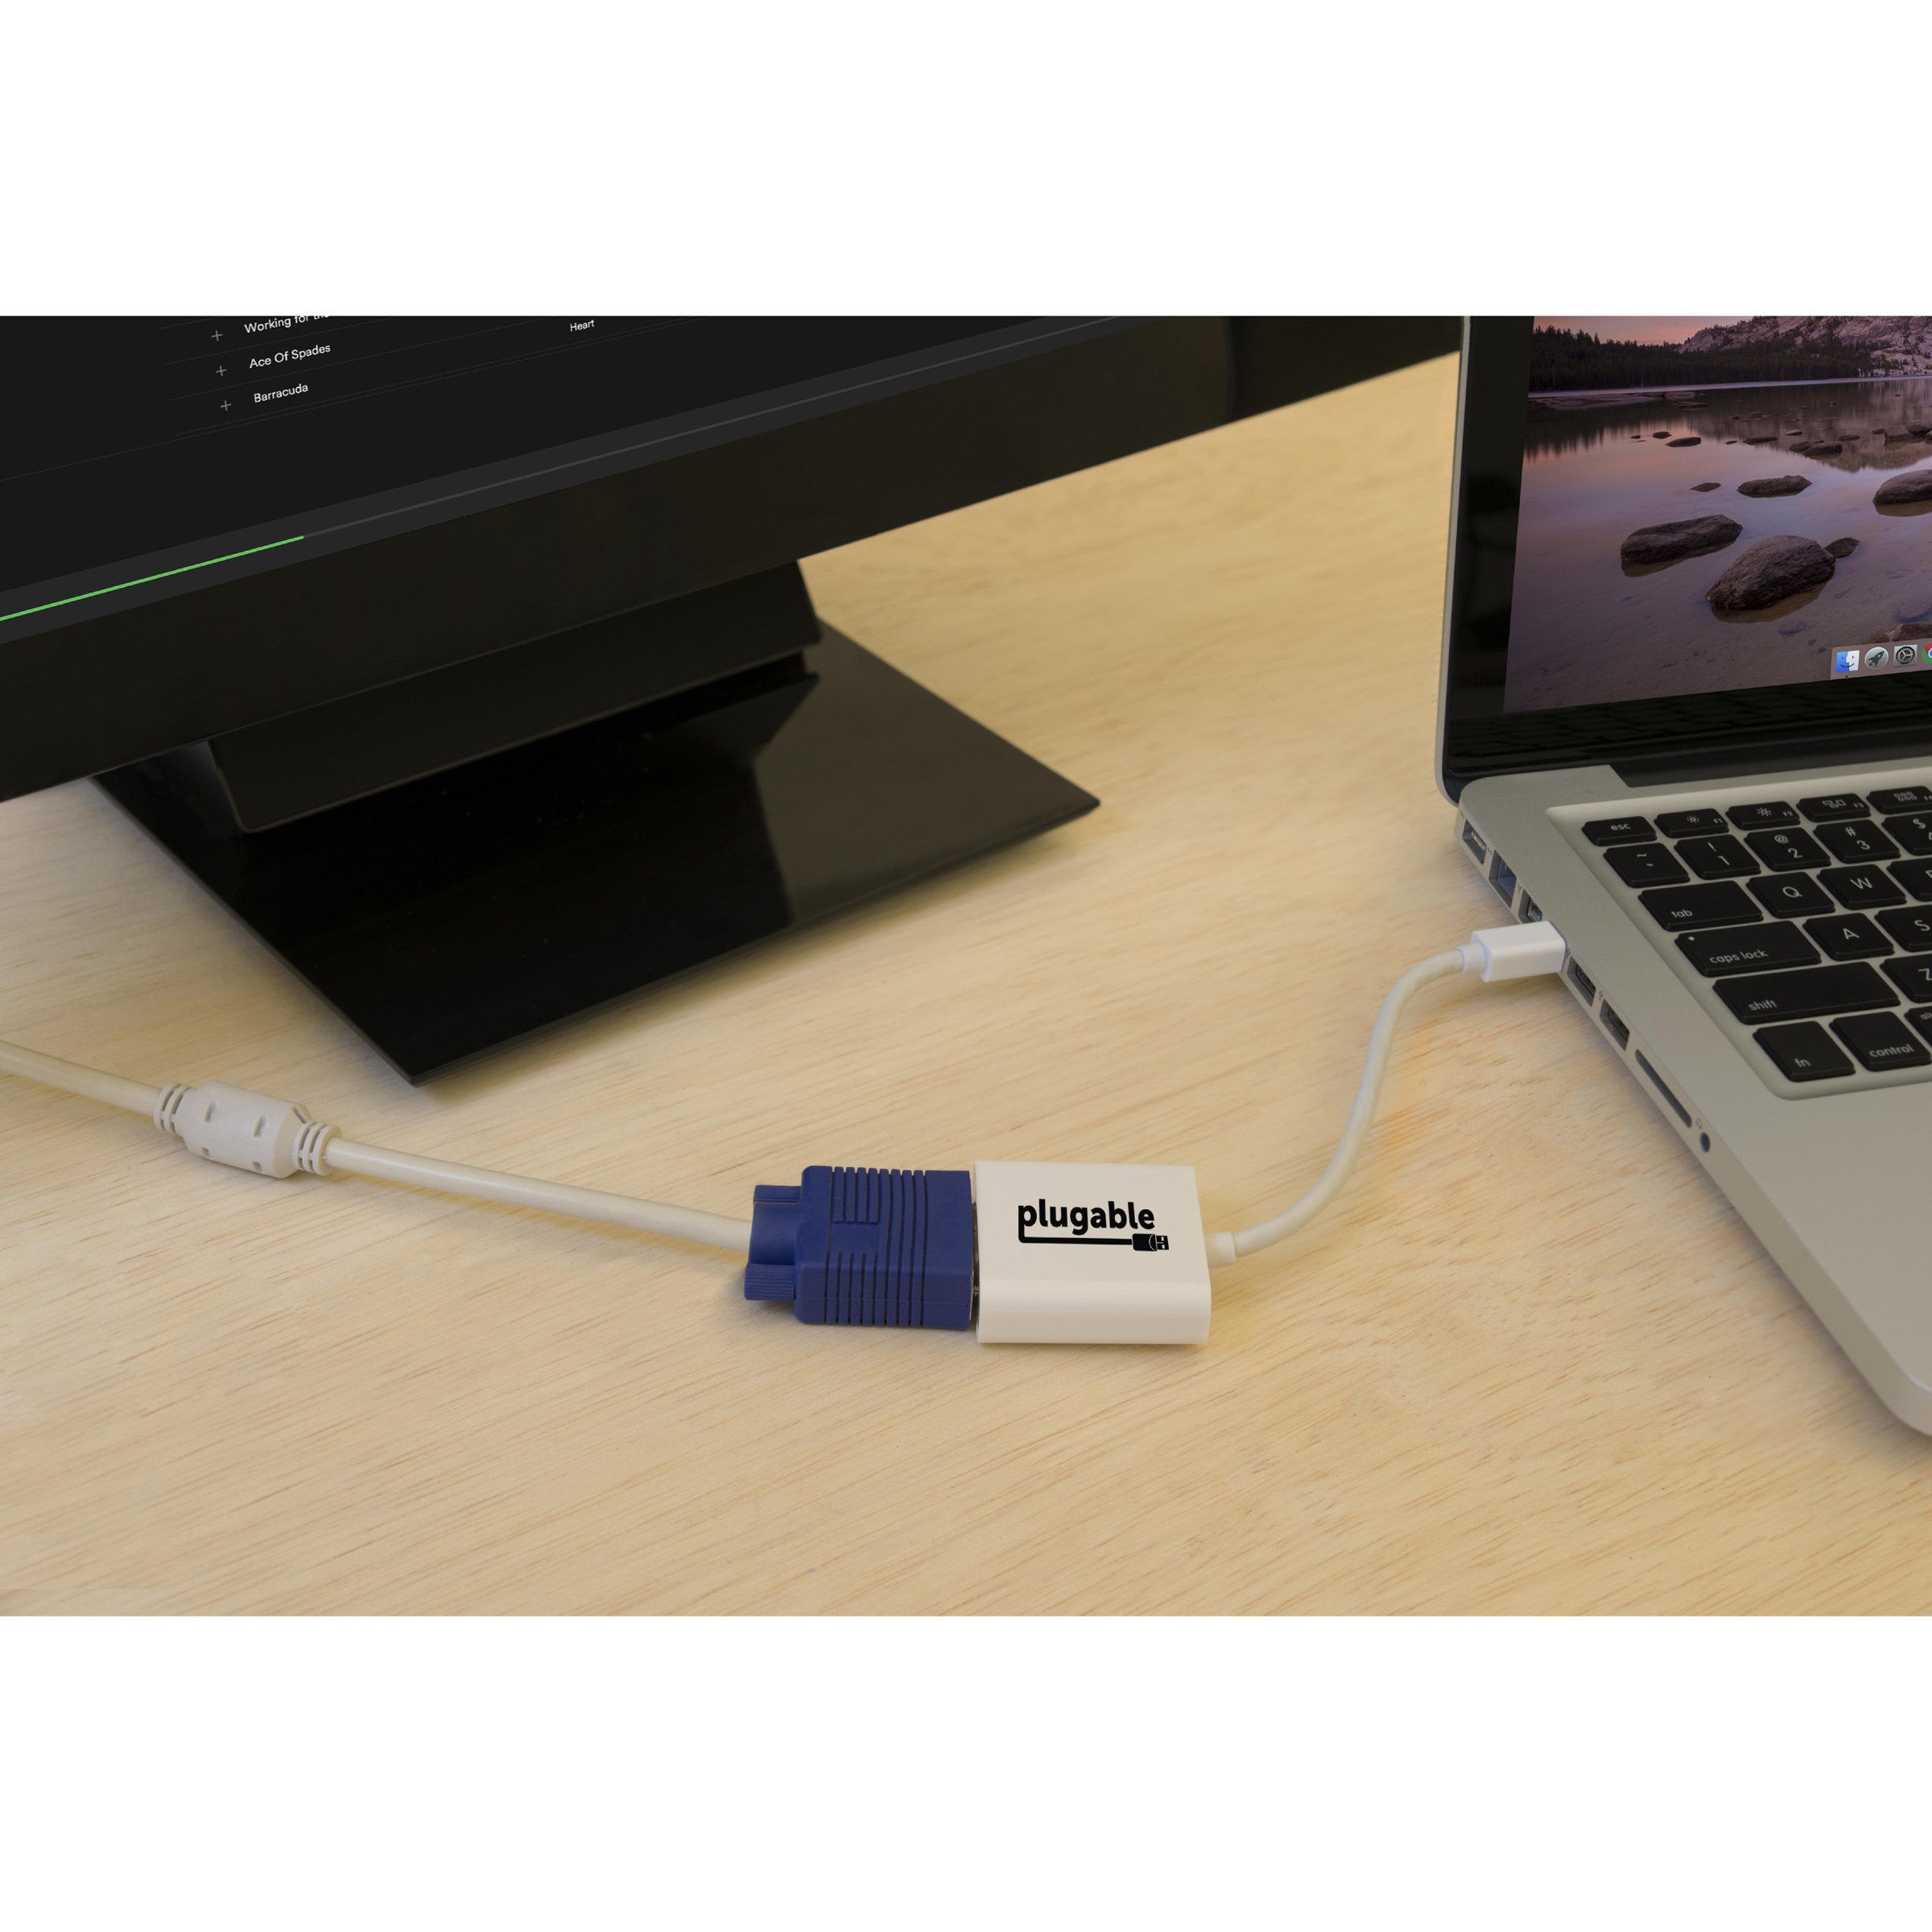 Plugable Mini DisplayPort (Thunderbolt 2) to VGA Adapter (Supports Mac, Windows, Linux Systems and Displays up to 1920x1080, Active) - image 3 of 5